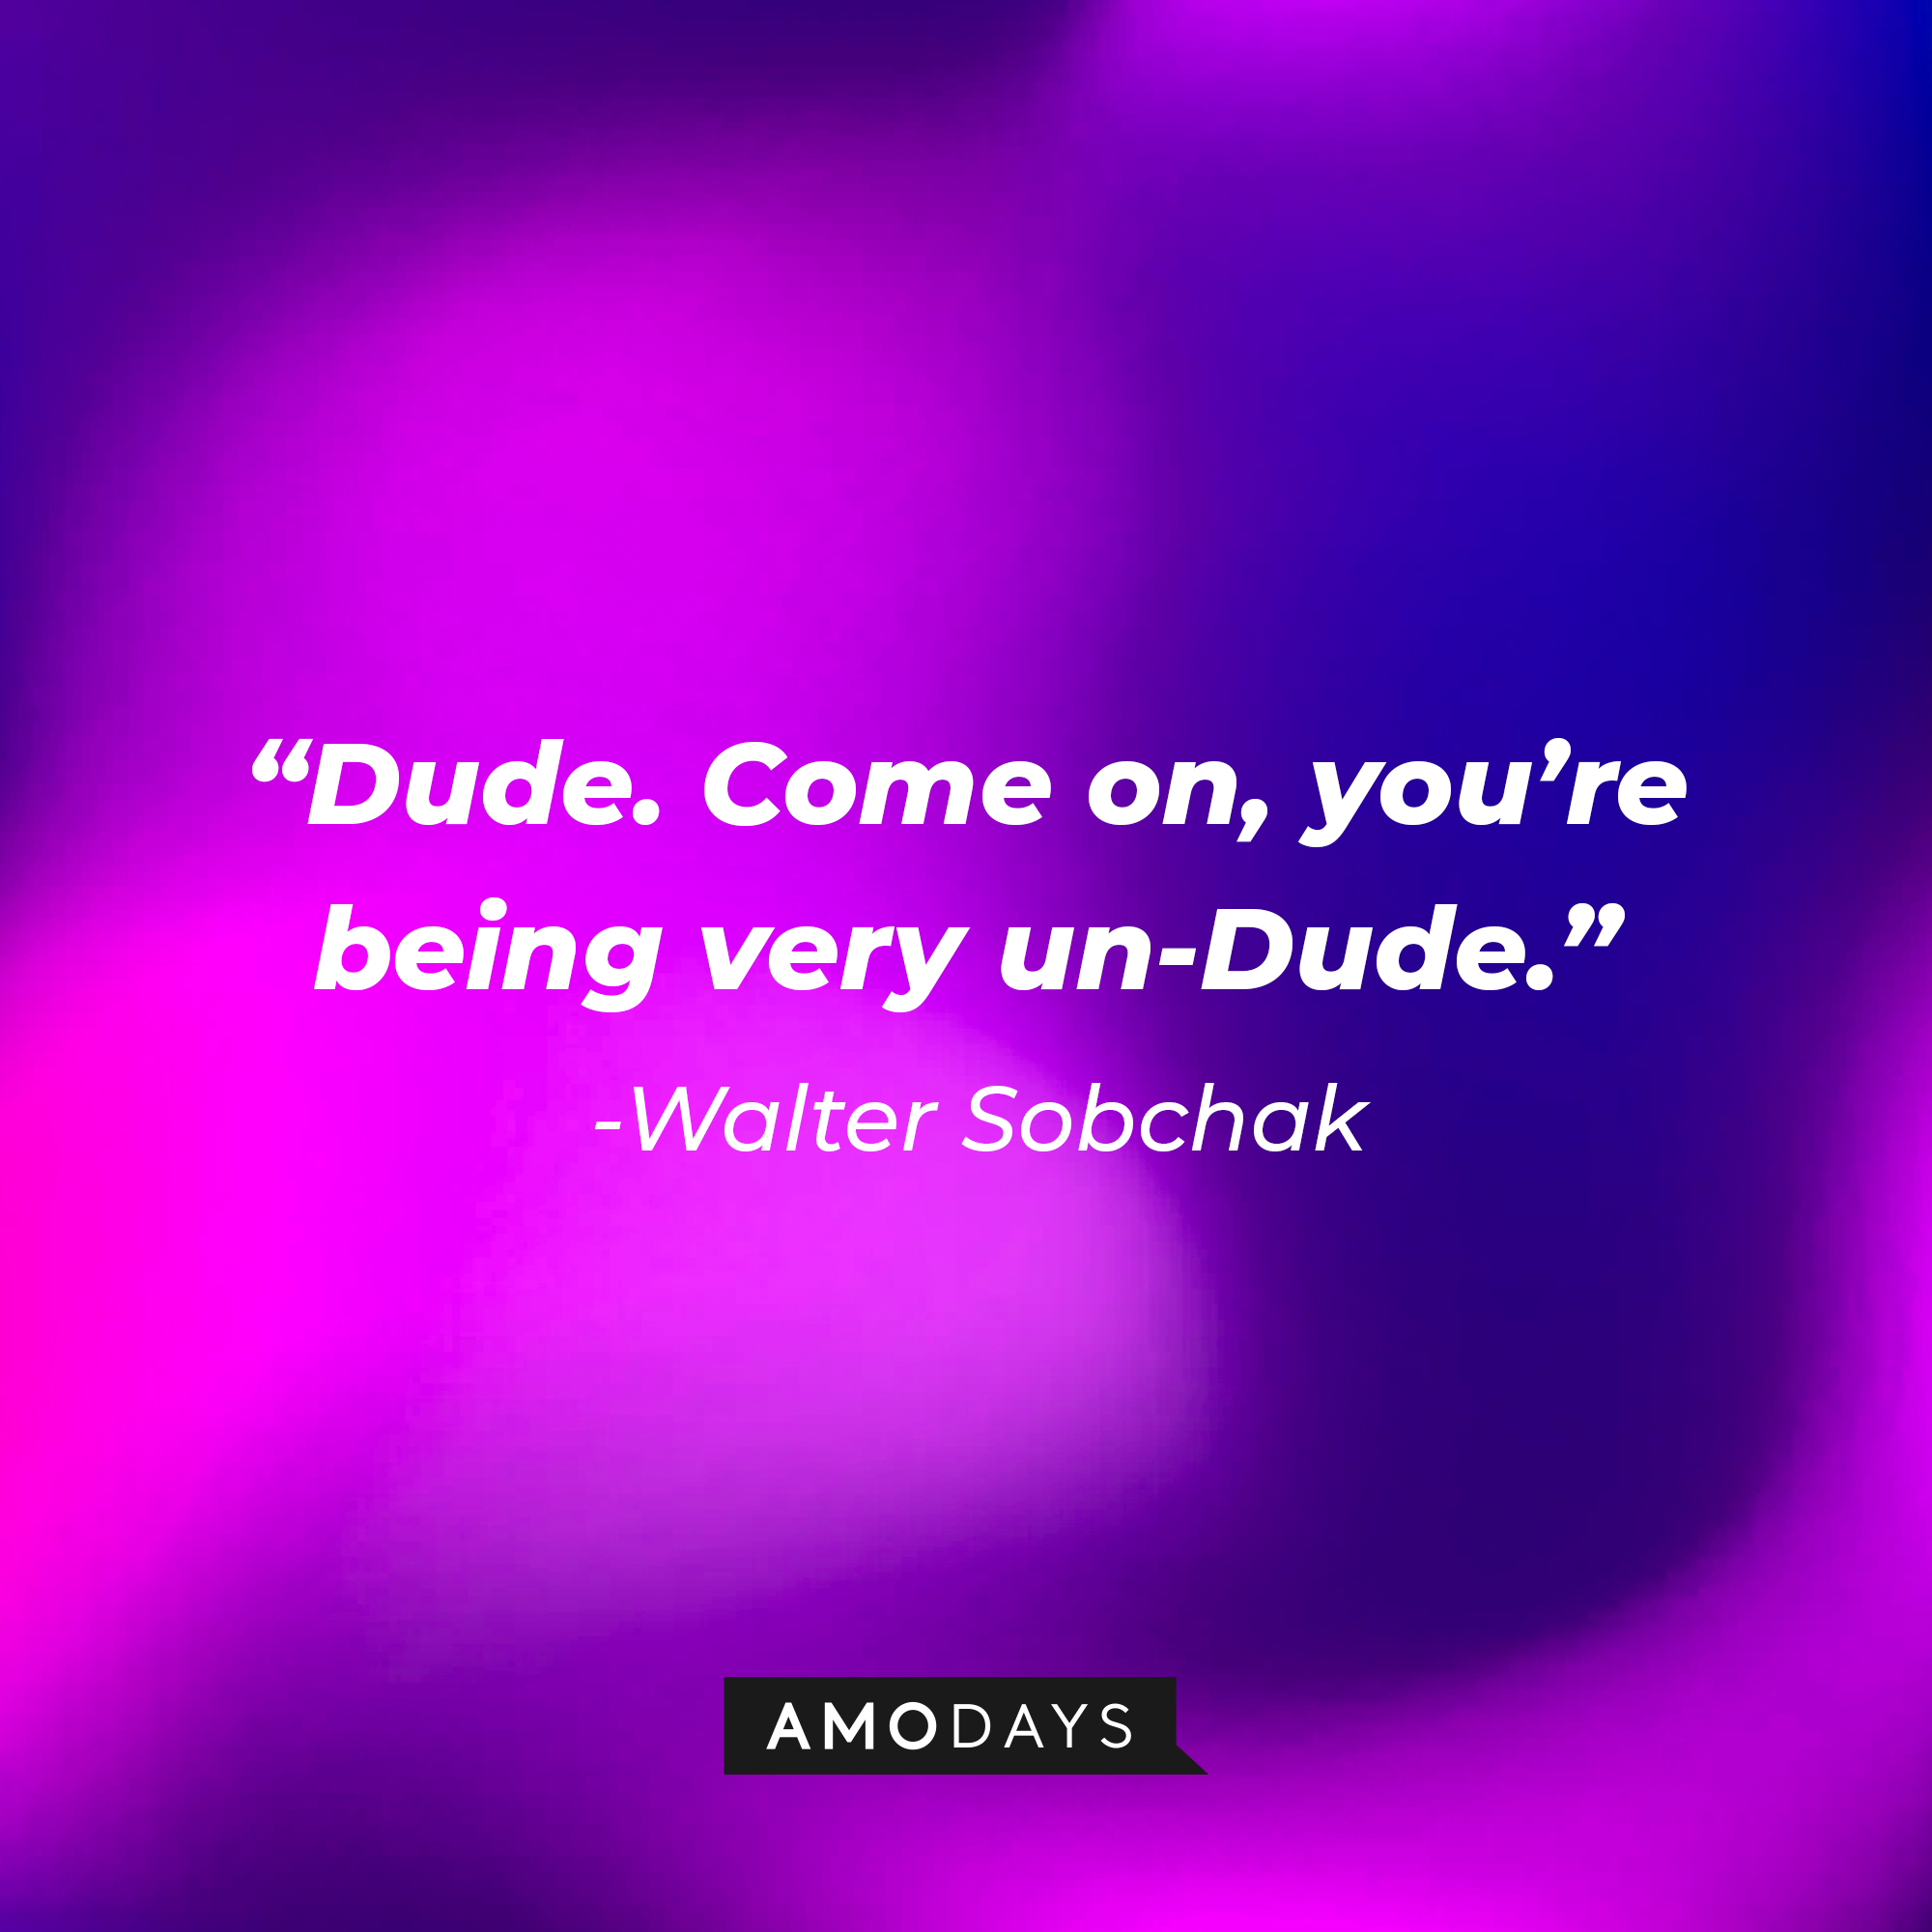 Walter Sobchak’s quote: “Dude. Come on, you’re being very un-Dude.” | Source: AmoDays